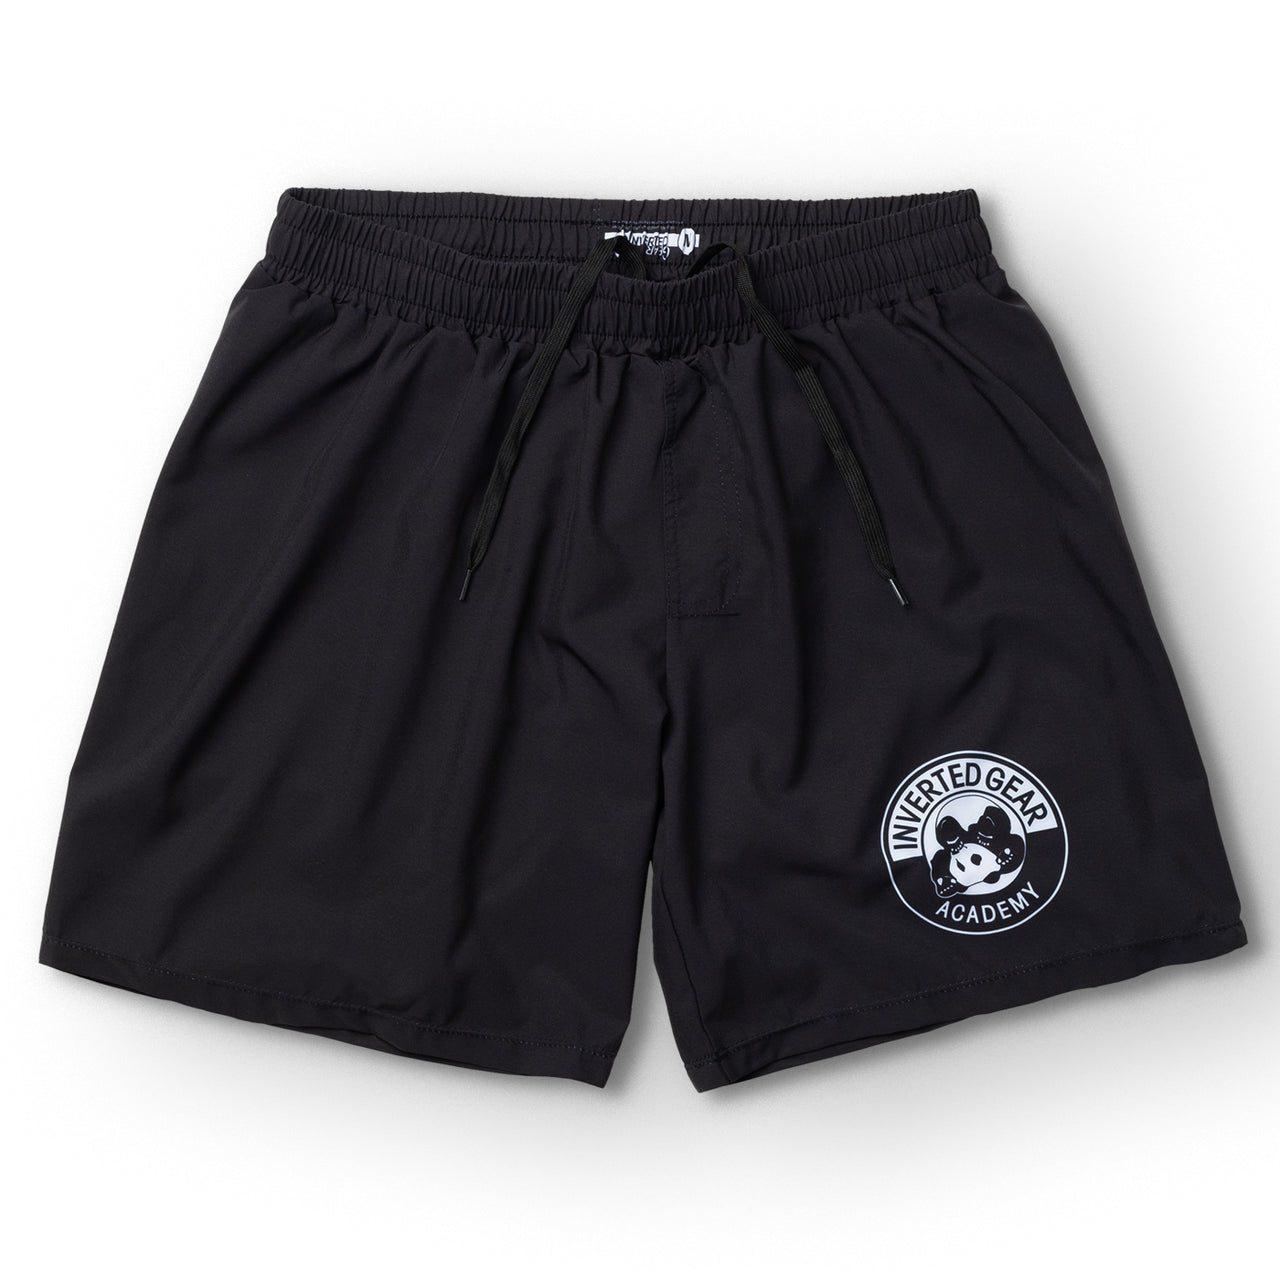 Inverted Gear Academy Shorts